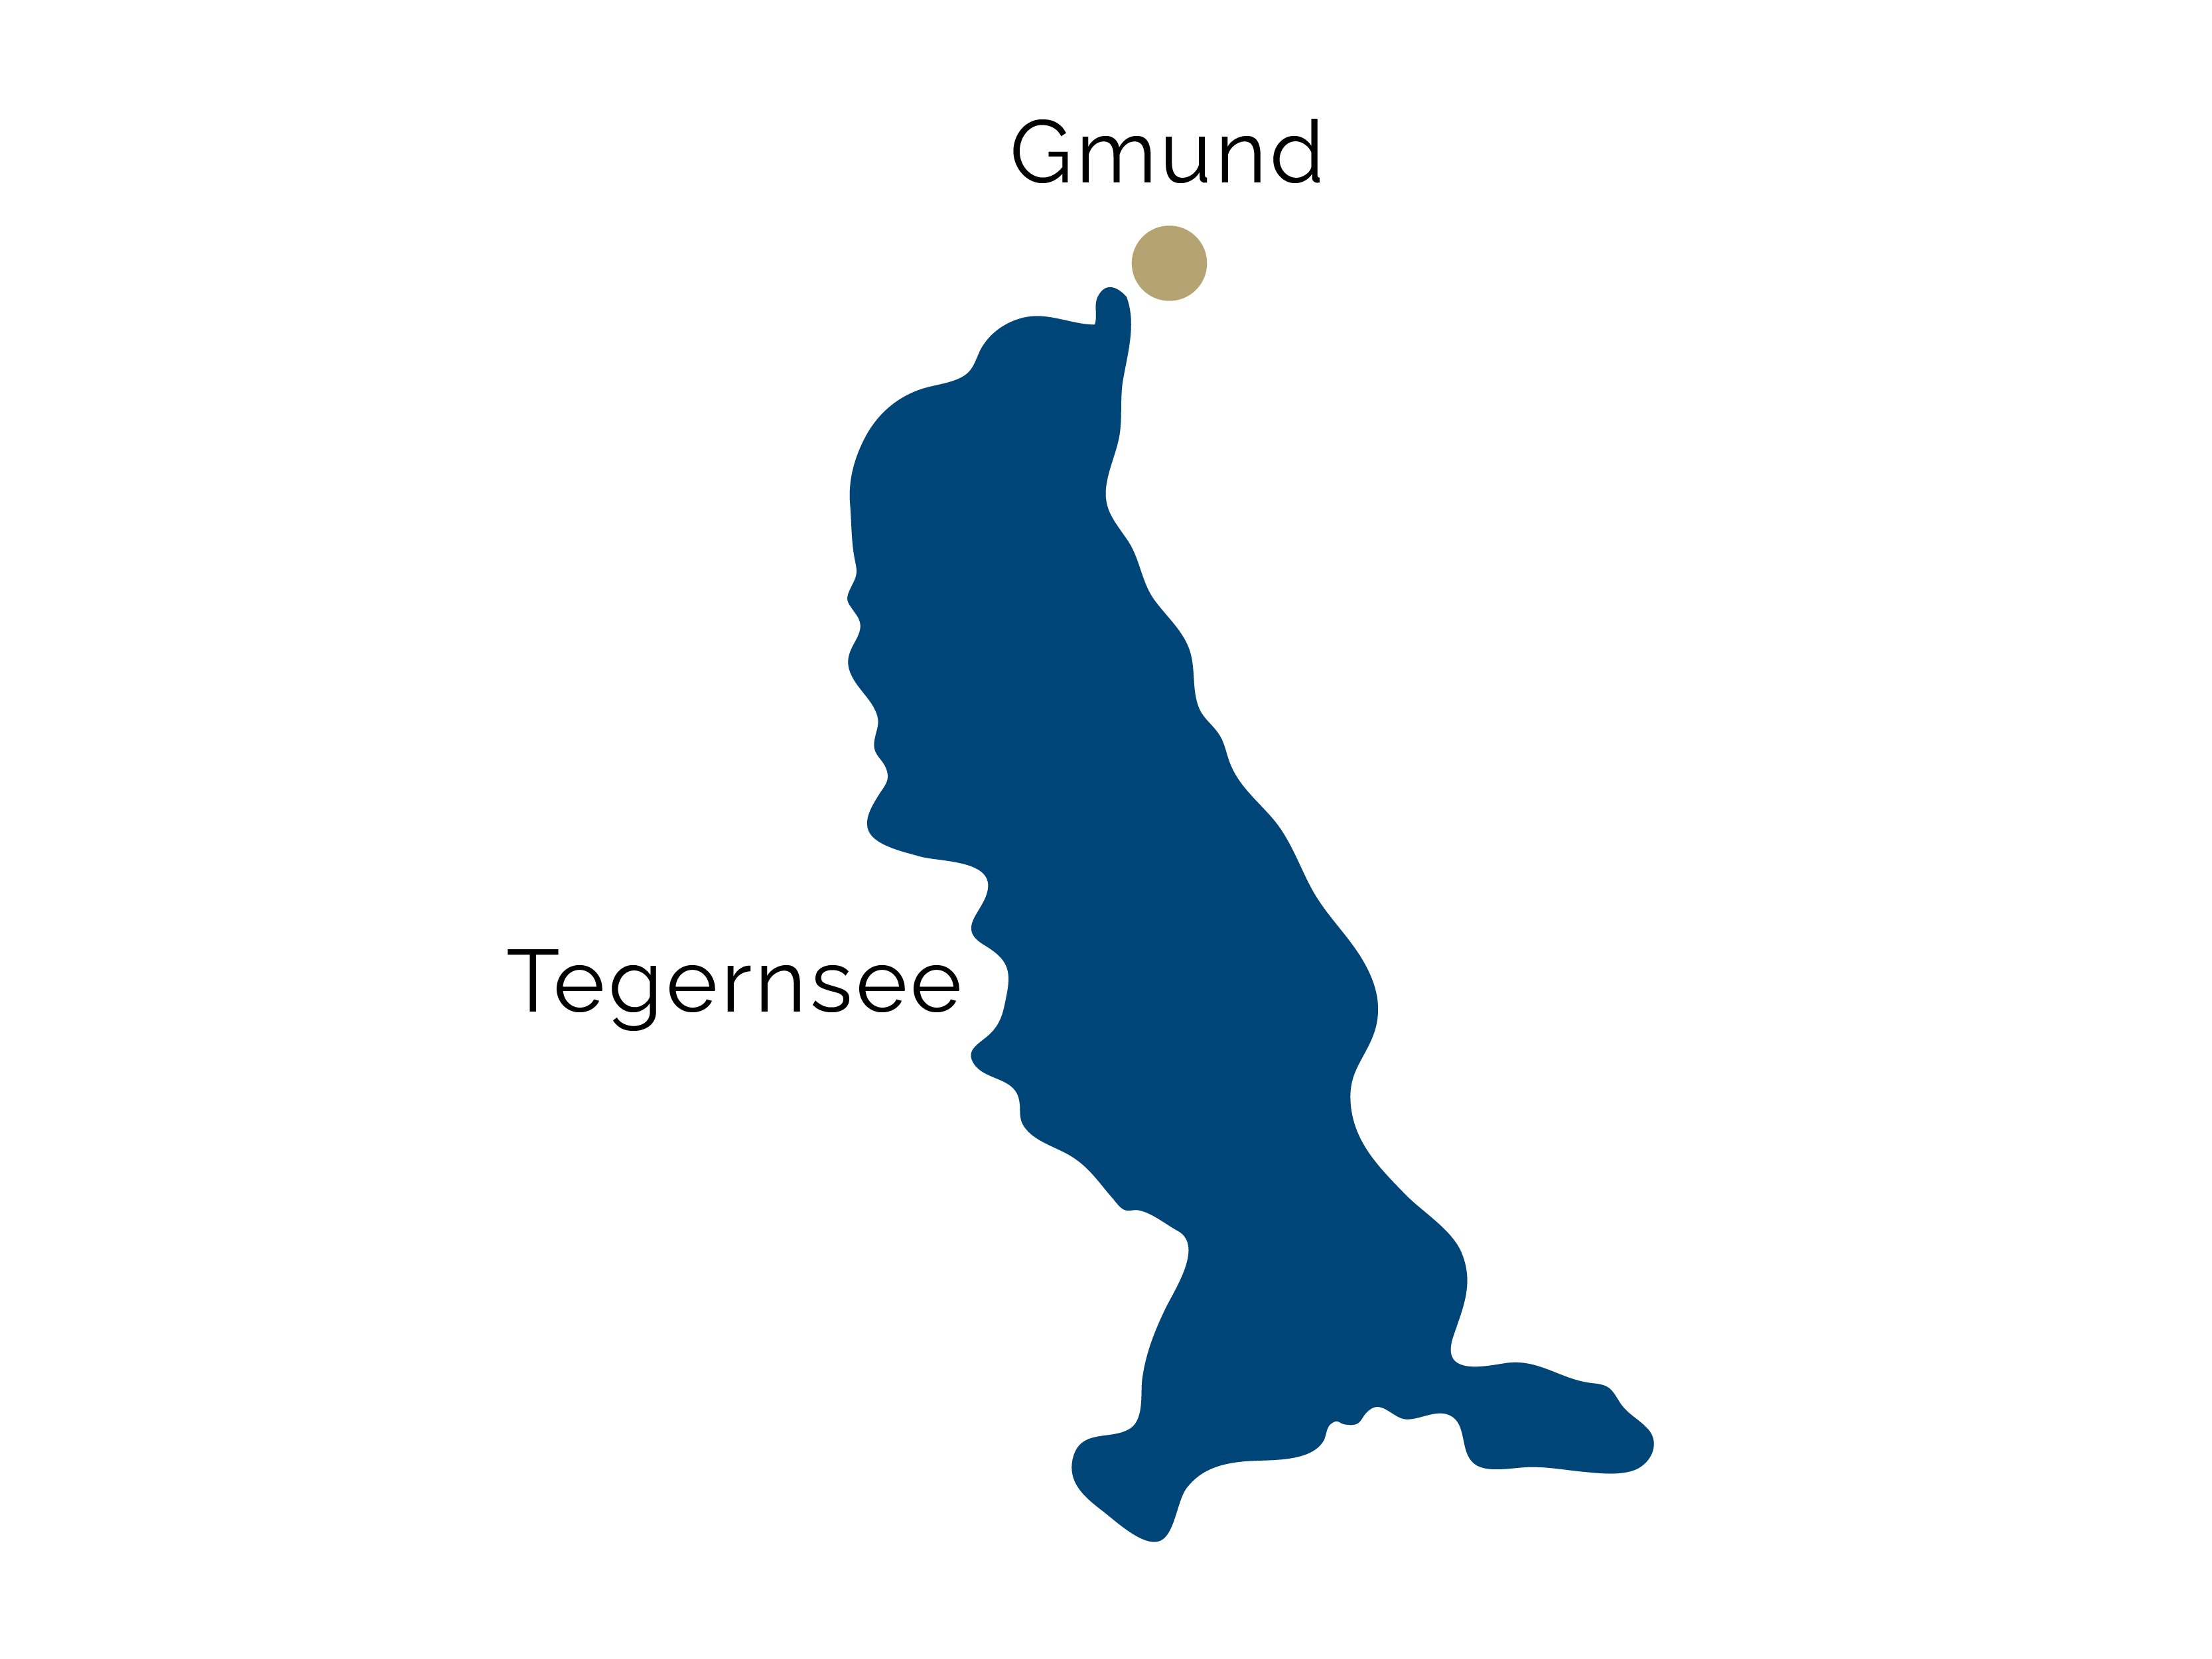 District map of the Lake Tegernsee region